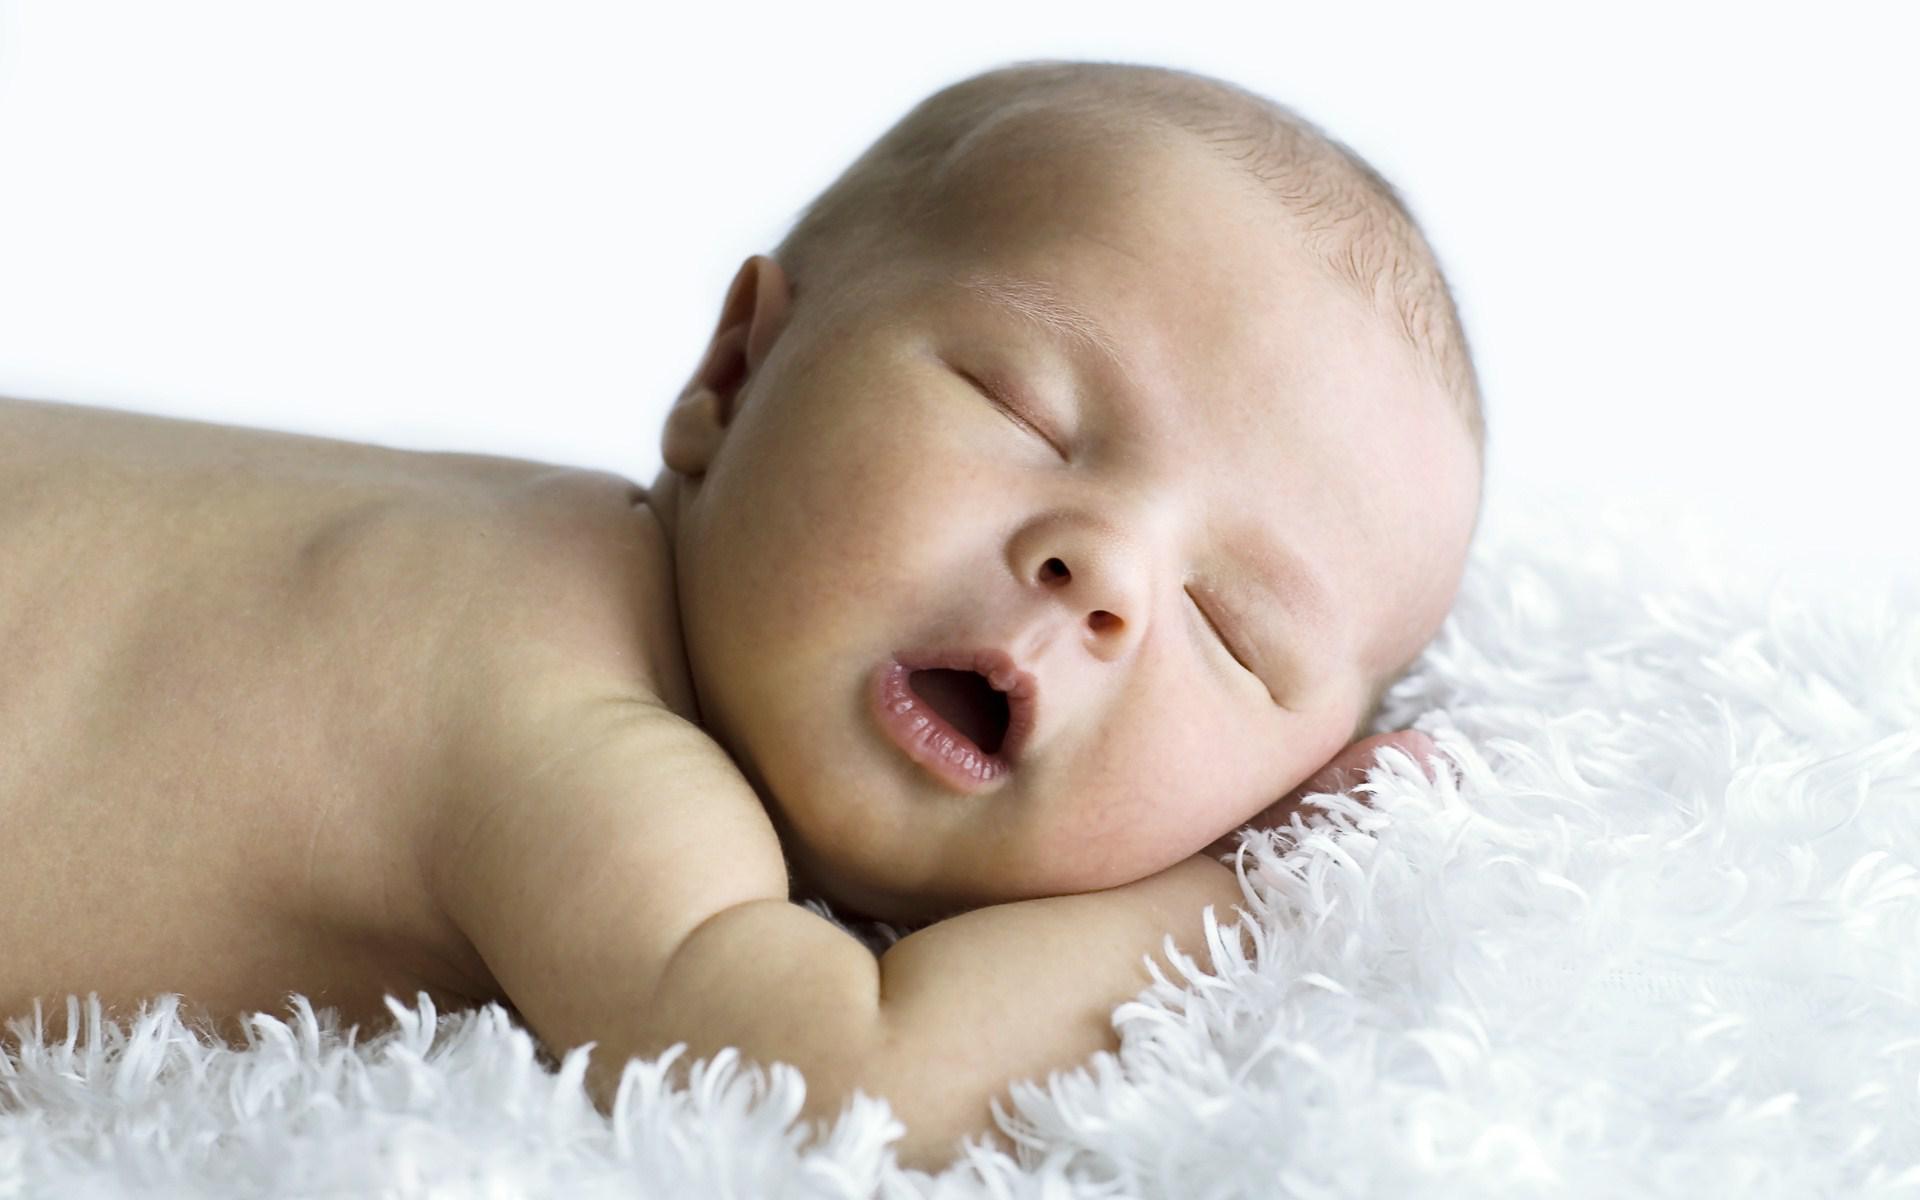 sleeping baby wallpaper,baby,child,face,skin,facial expression